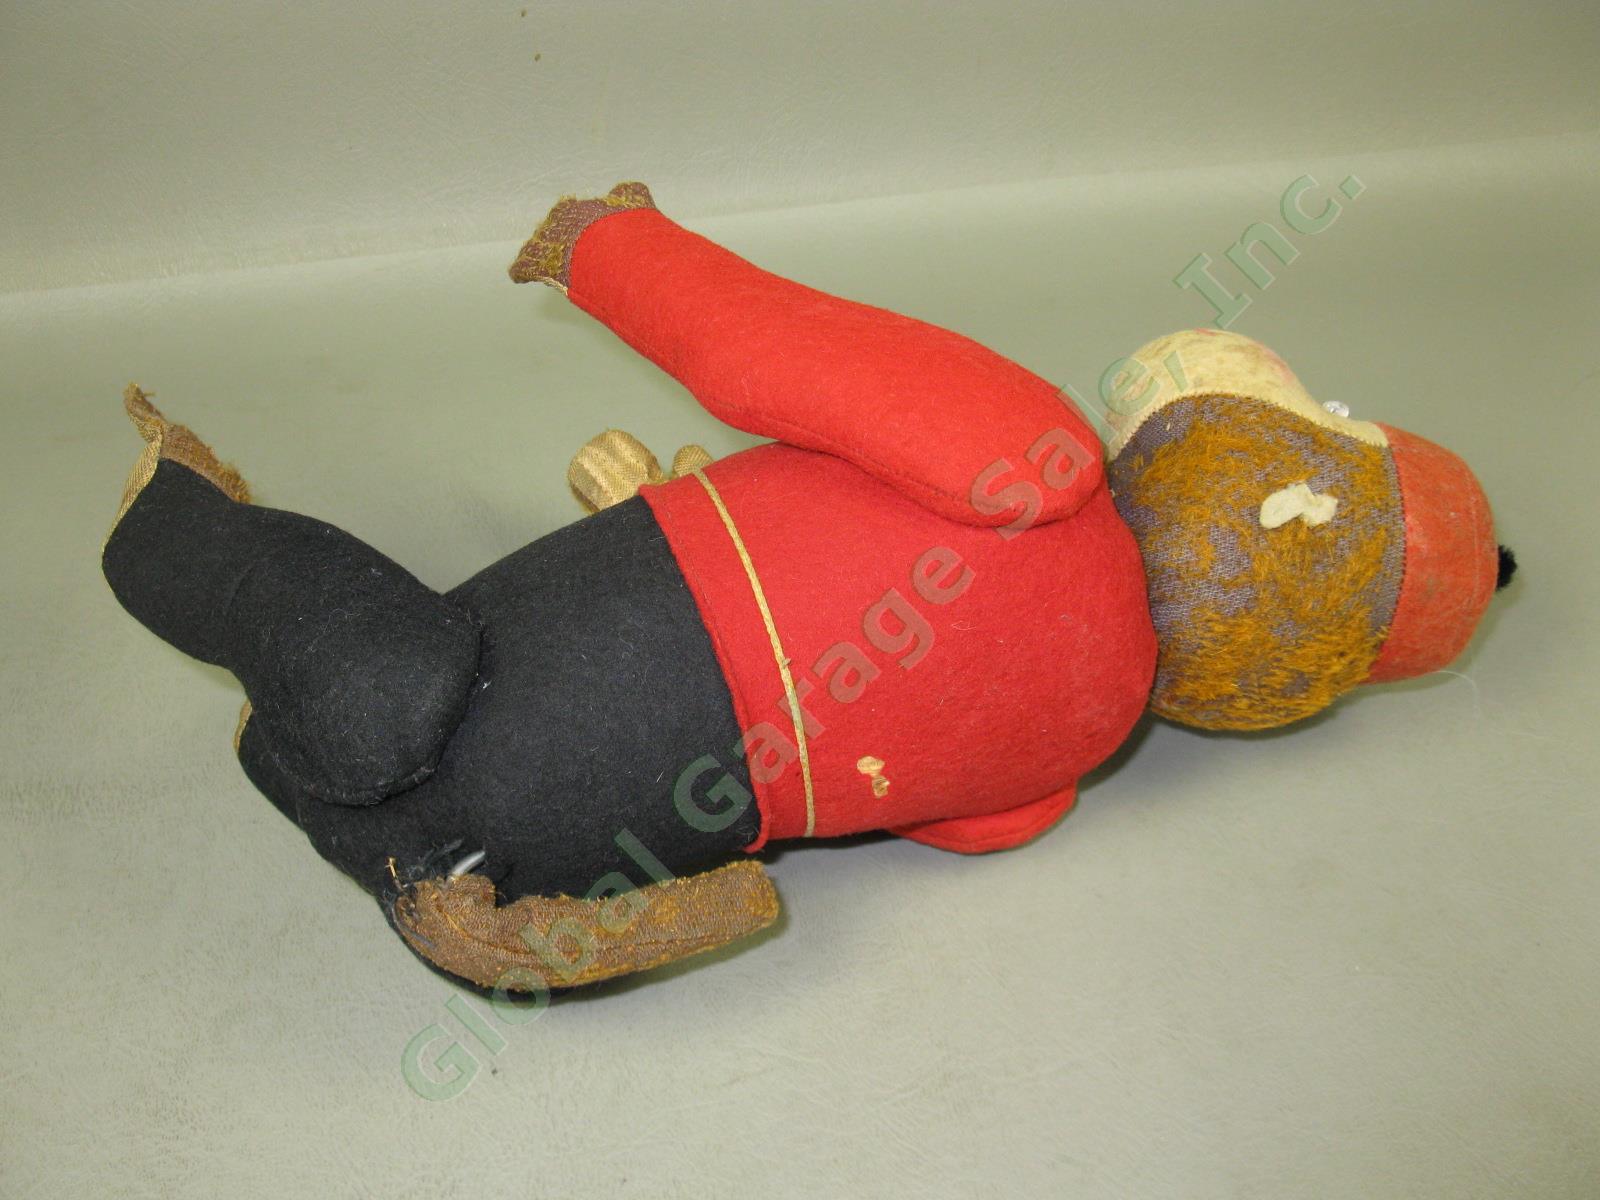 Vtg Antique 1920s Schuco Yes No Jointed Monkey Toy W/ Red Bellhop Uniform Works 3